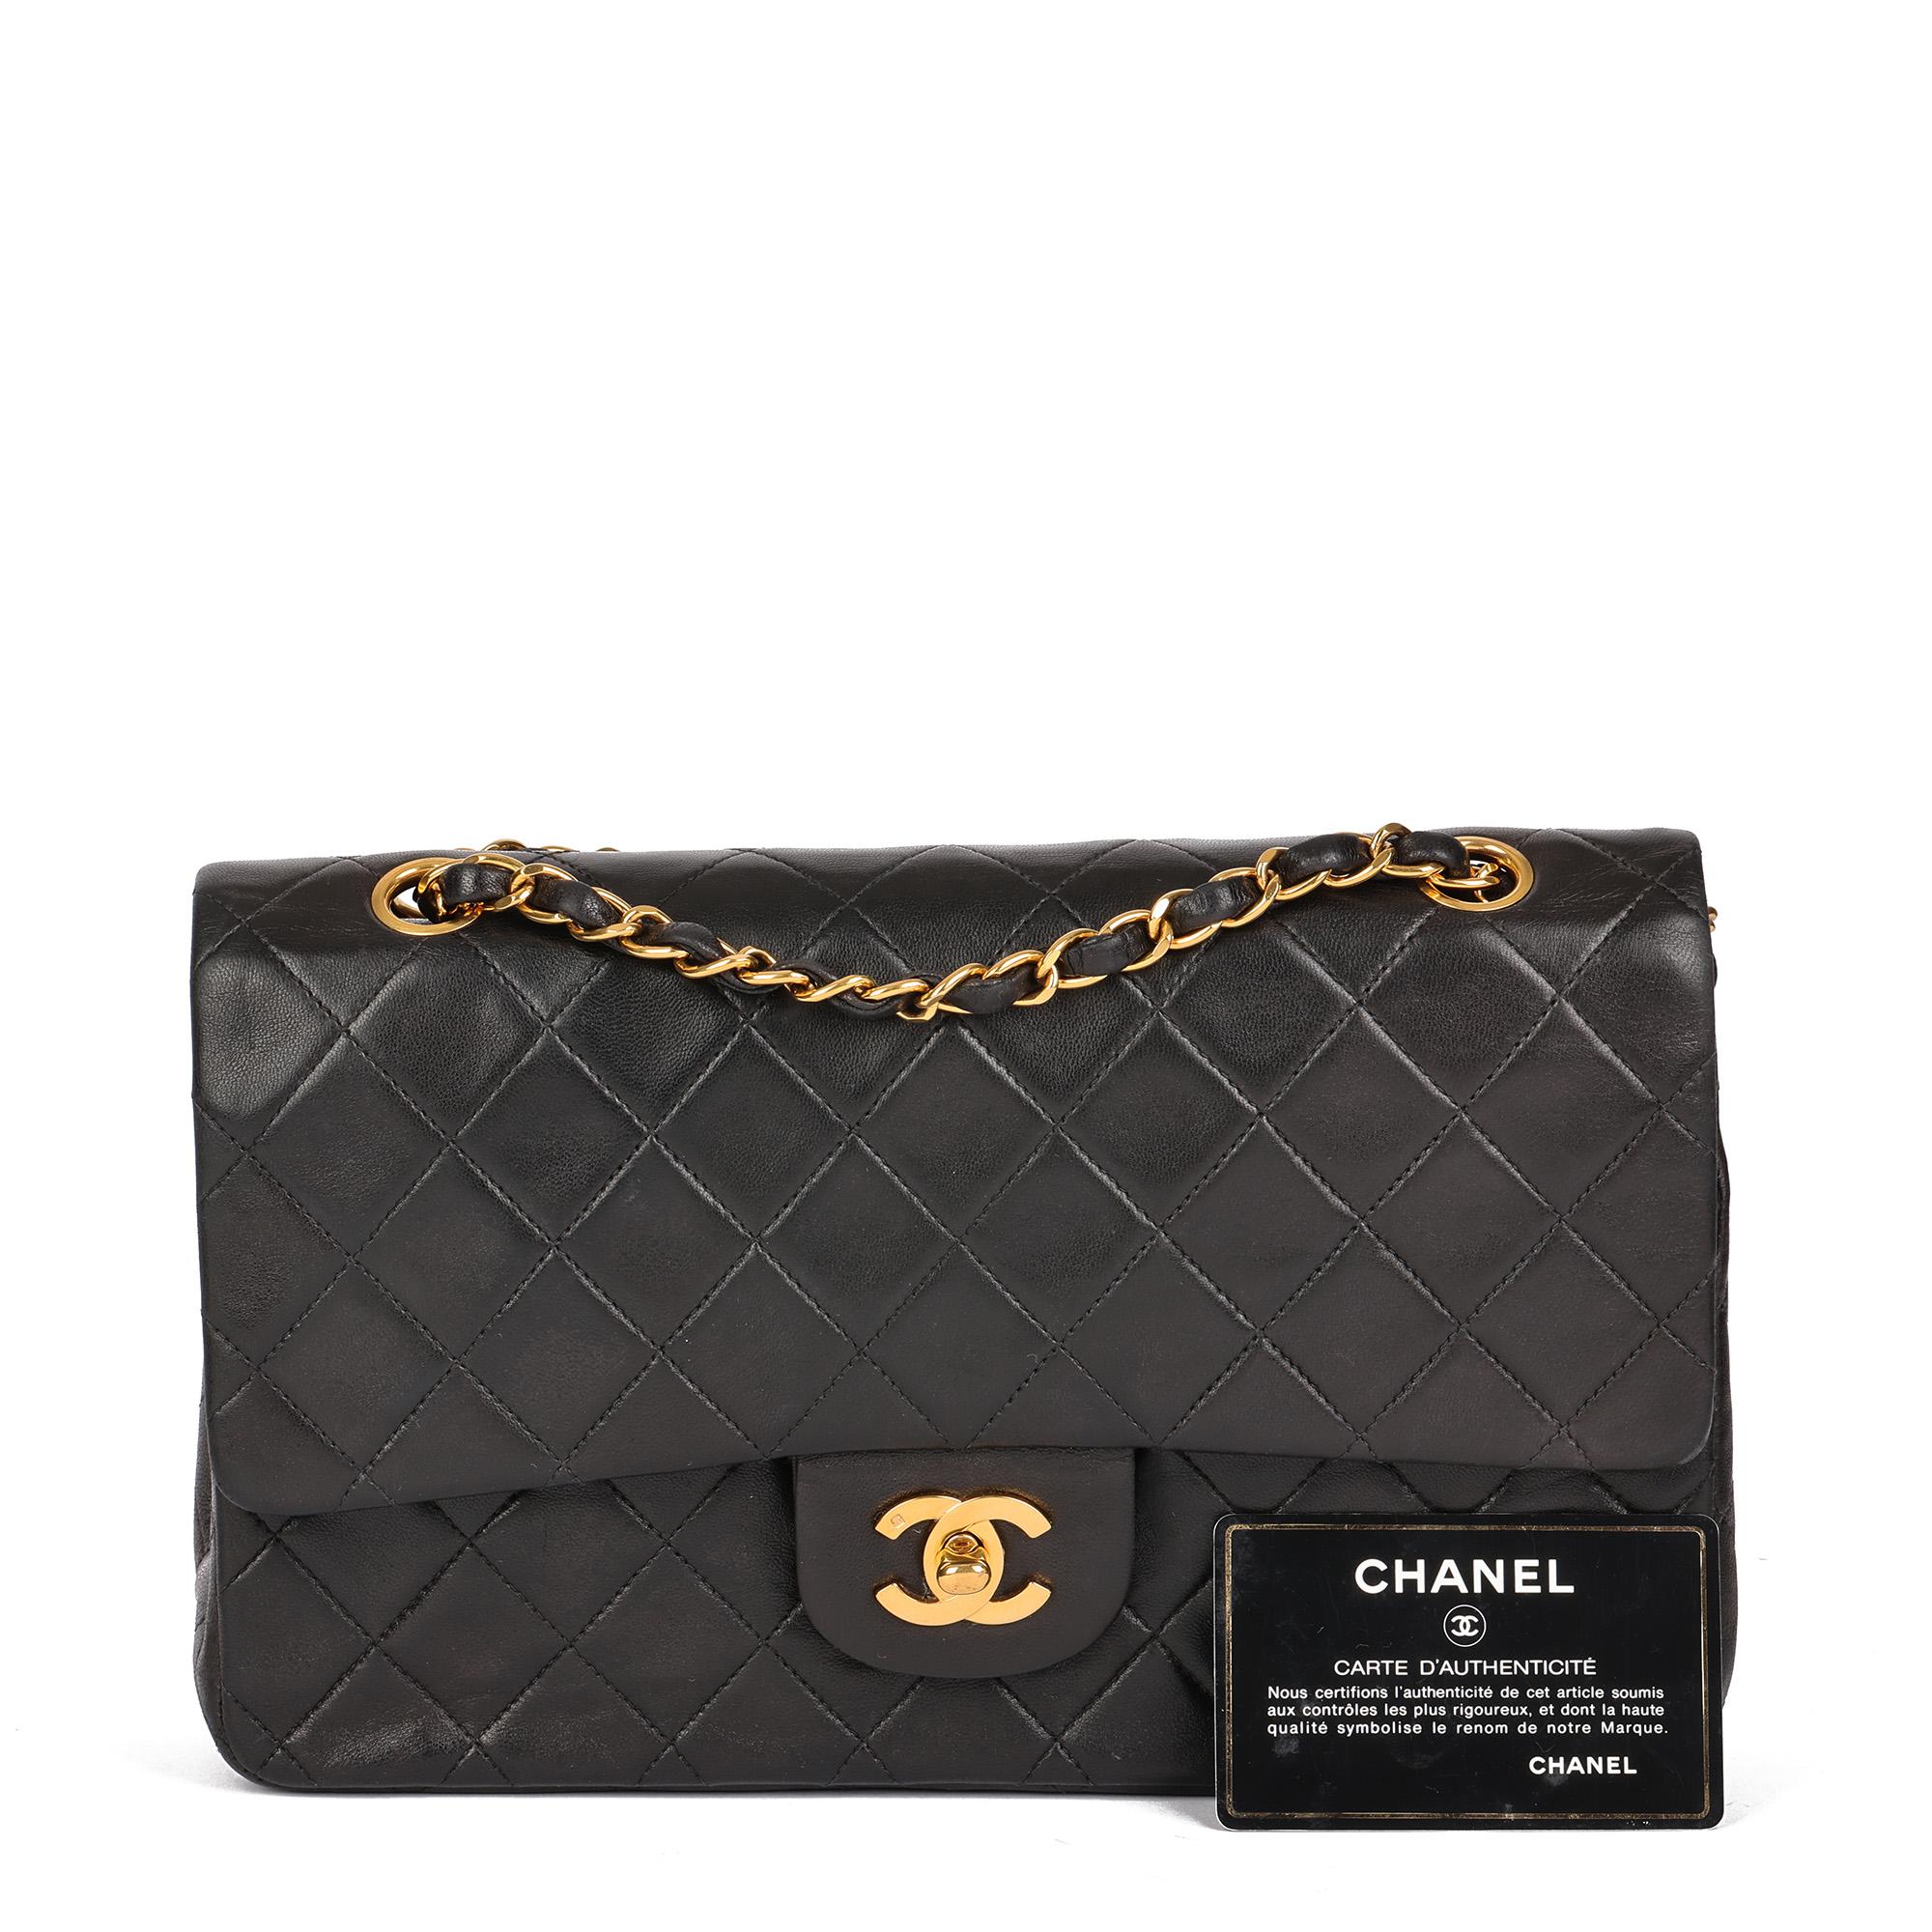 Chanel BLACK QUILTED LAMBSKIN VINTAGE MEDIUM CLASSIC DOUBLE FLAP BAG 7